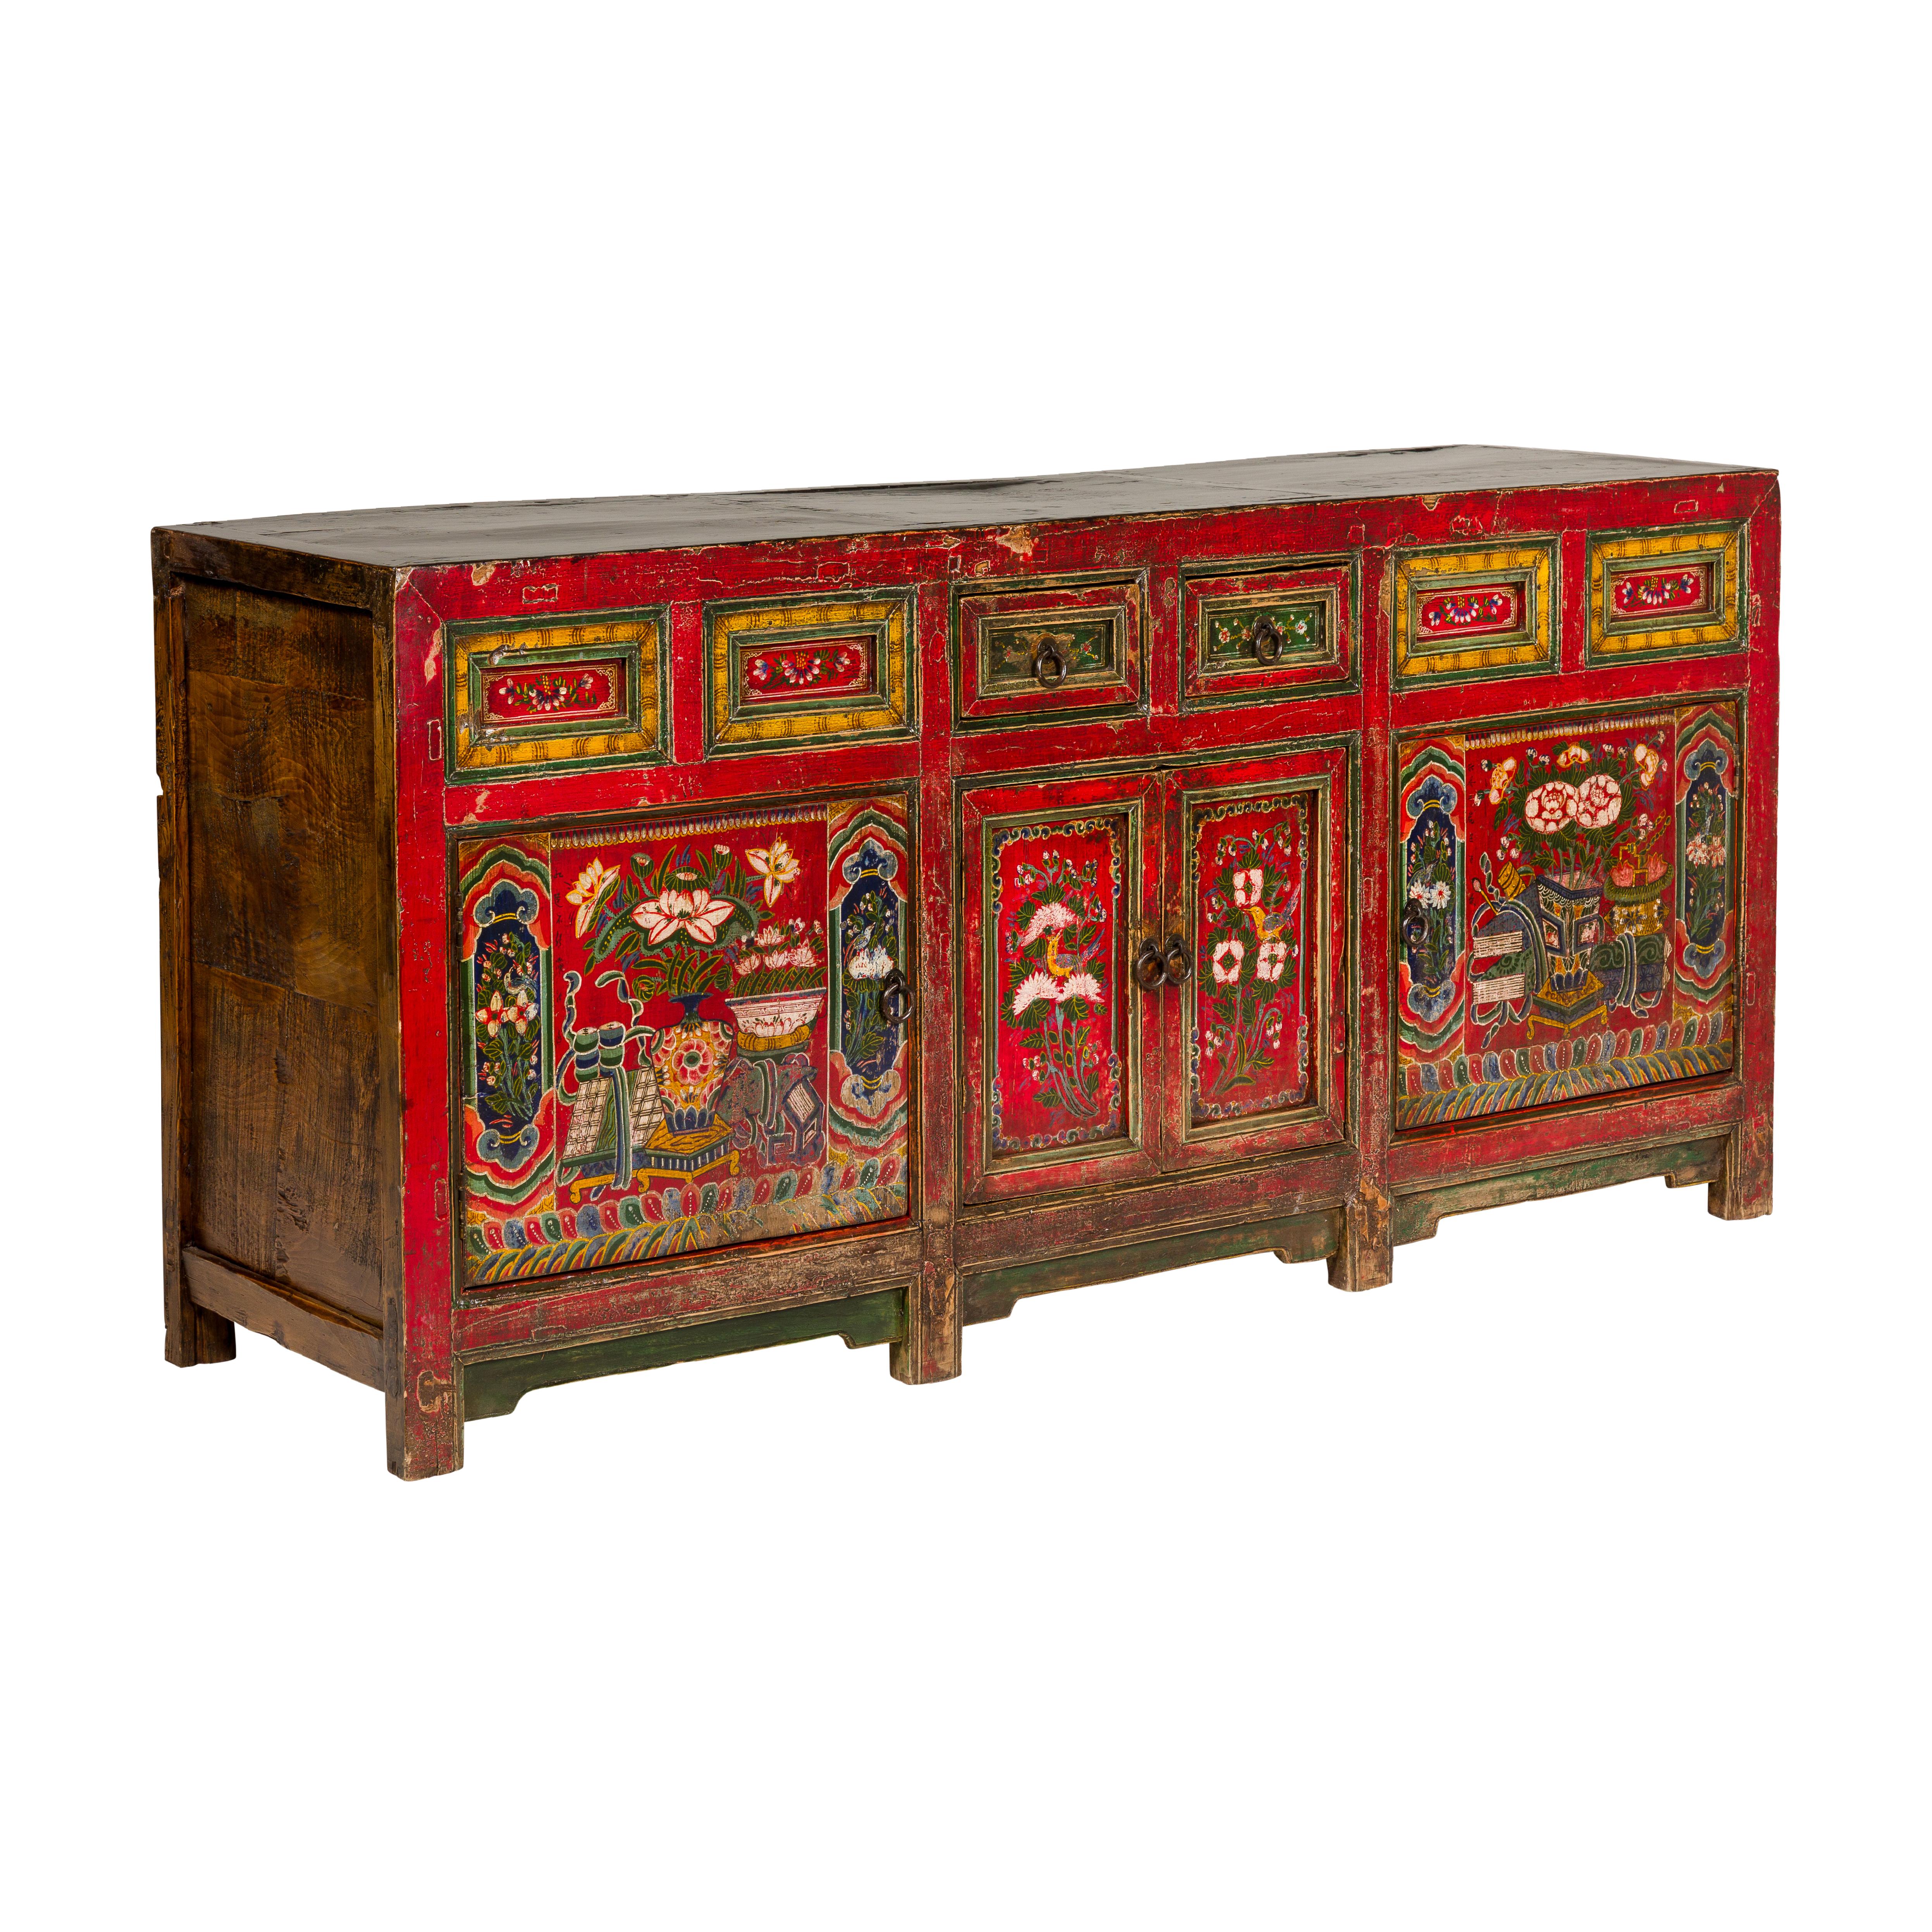 19th Century Mongolian Polychrome Sideboard with Doors, Drawers and Floral Décor 14